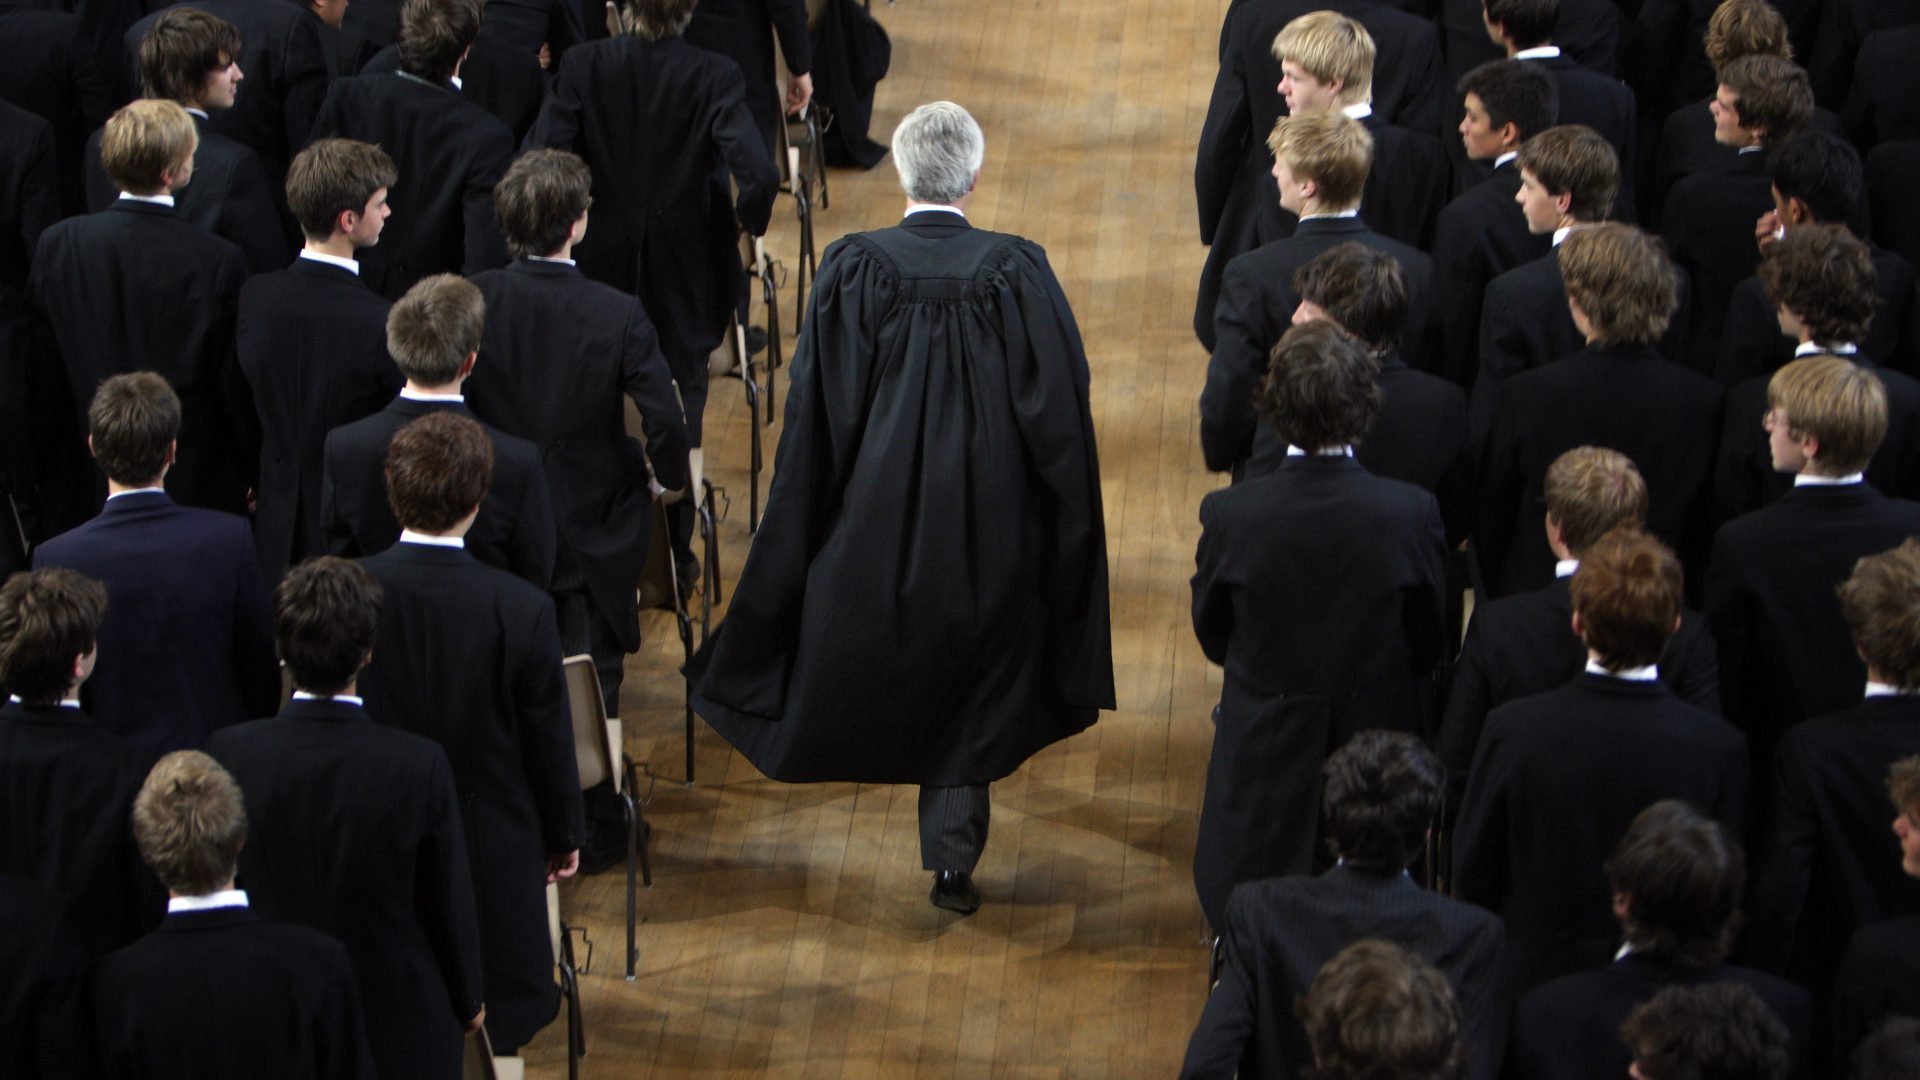 An assembly at Eton College. Photo: Christopher Furlong/Getty Images